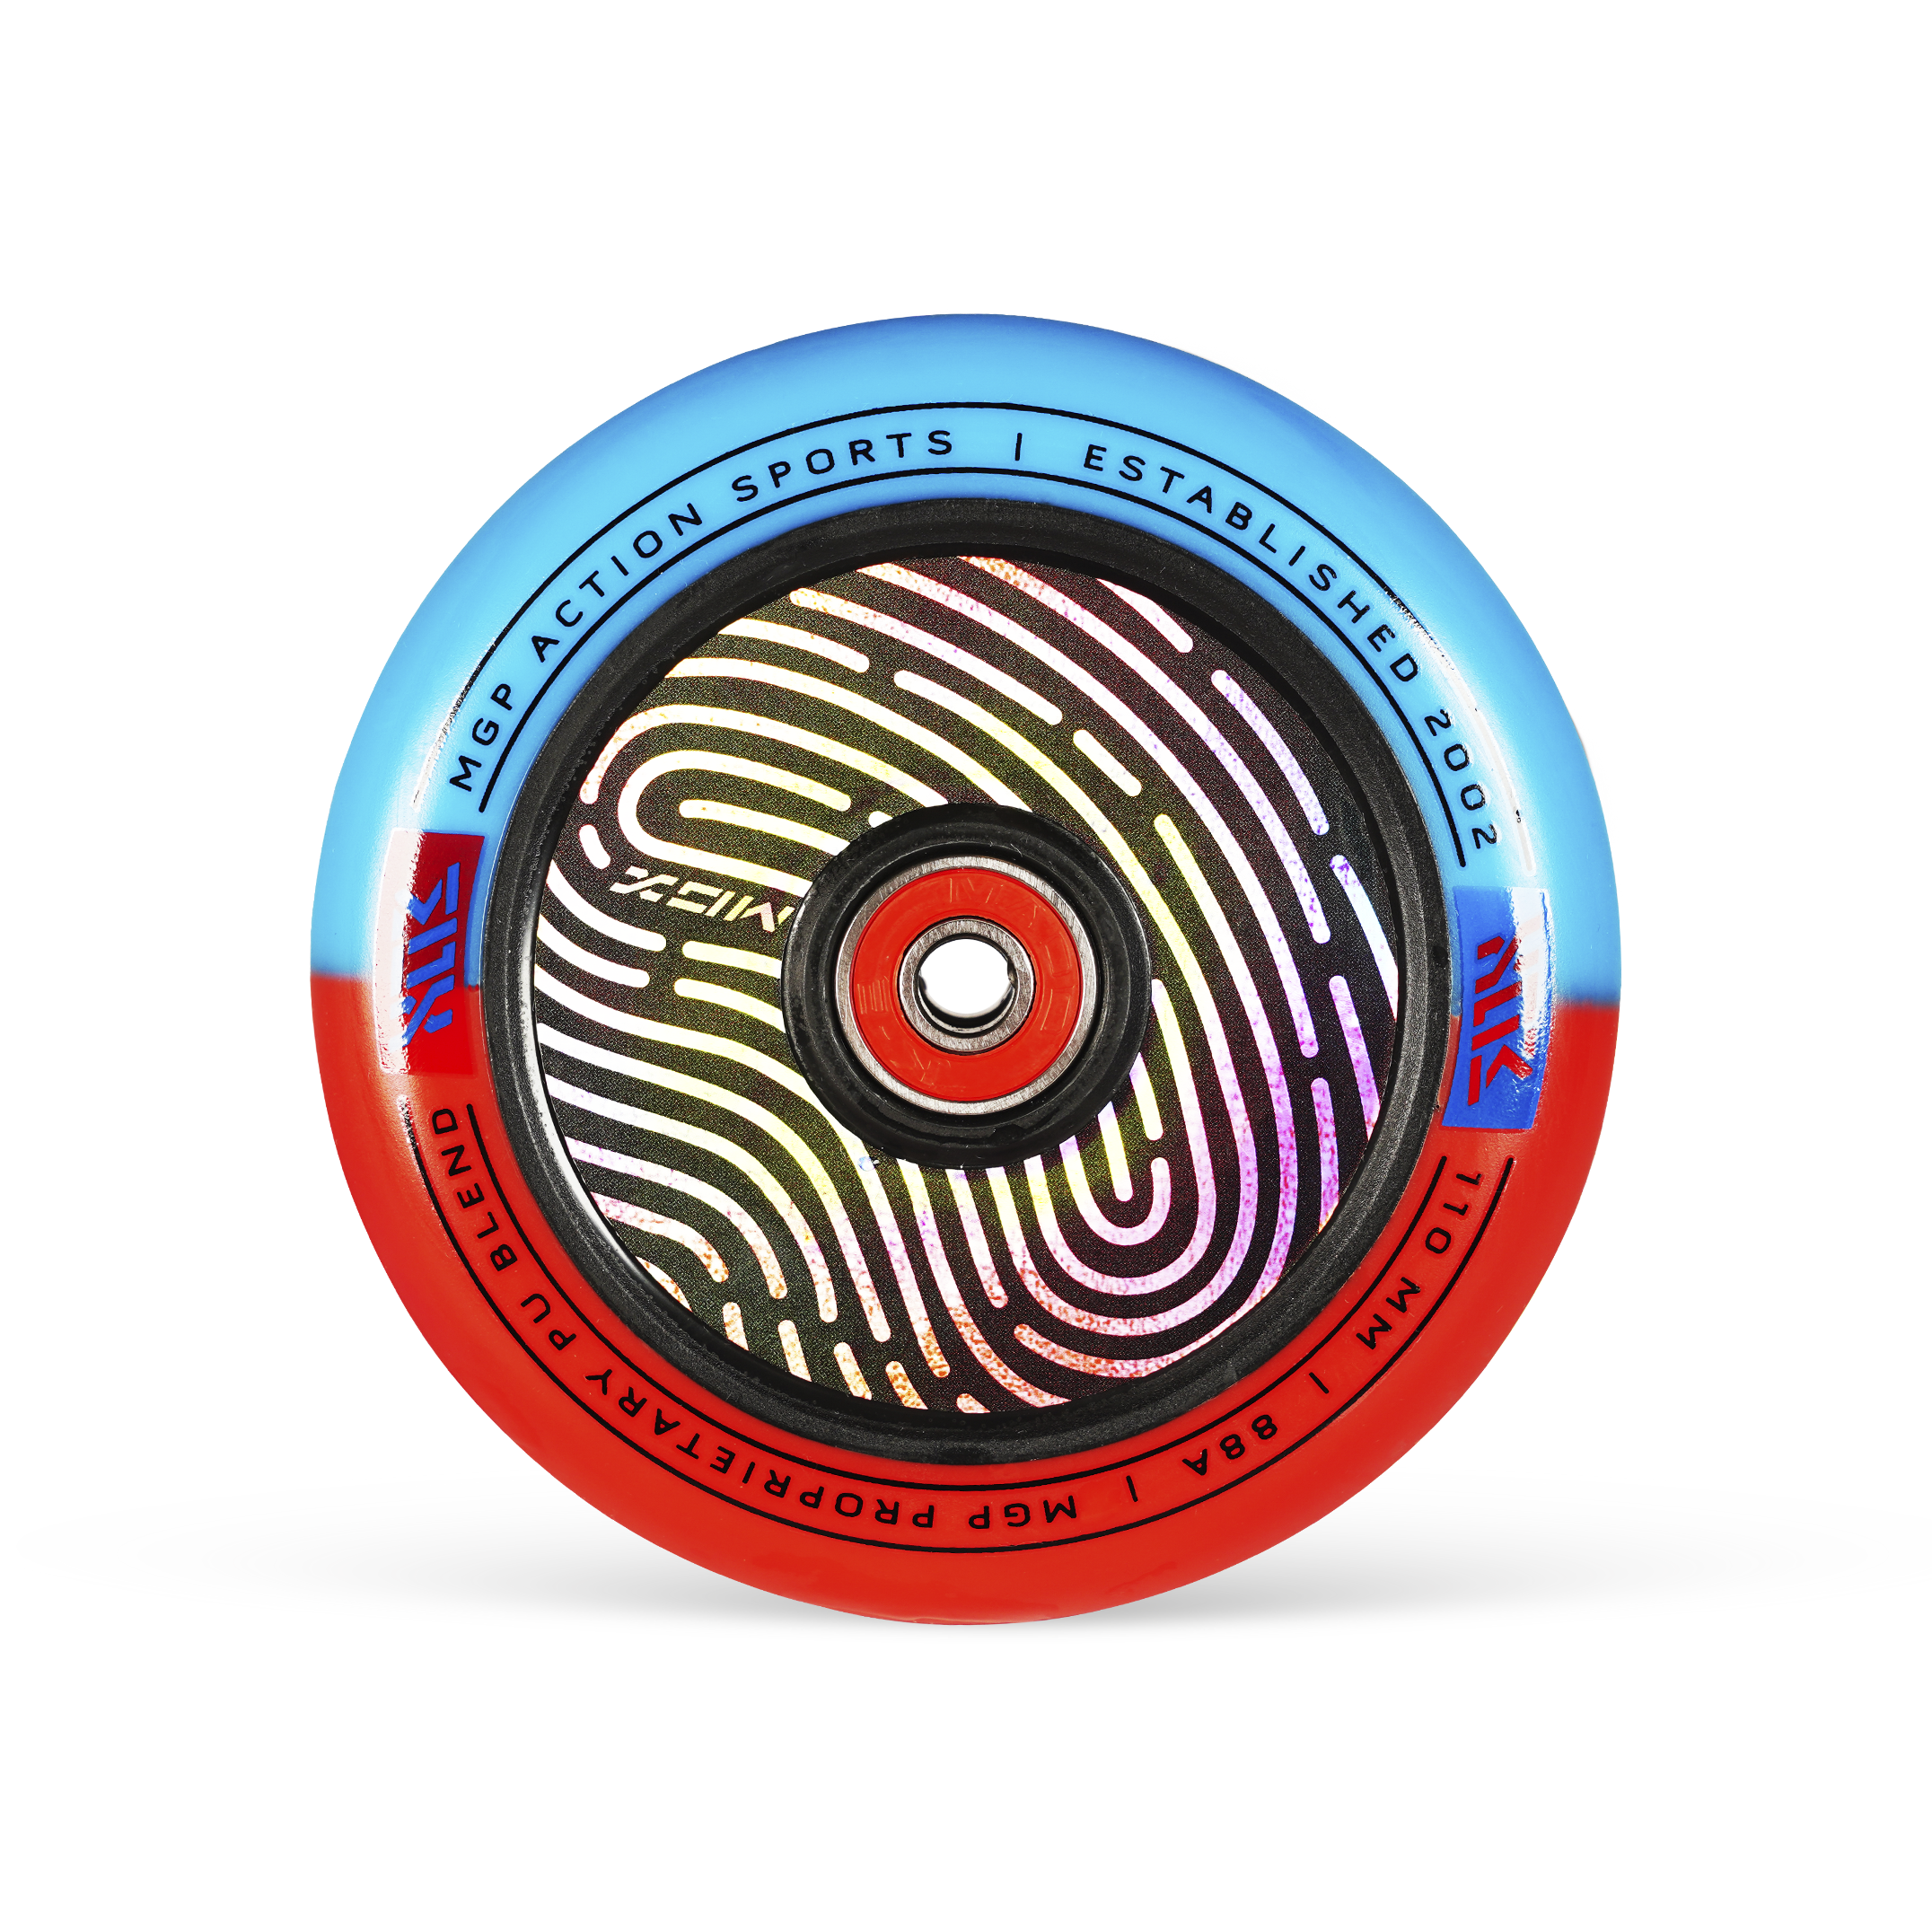 MADD GEAR 110MM HOLOGRAPHIC WHEEL RED / BLUE